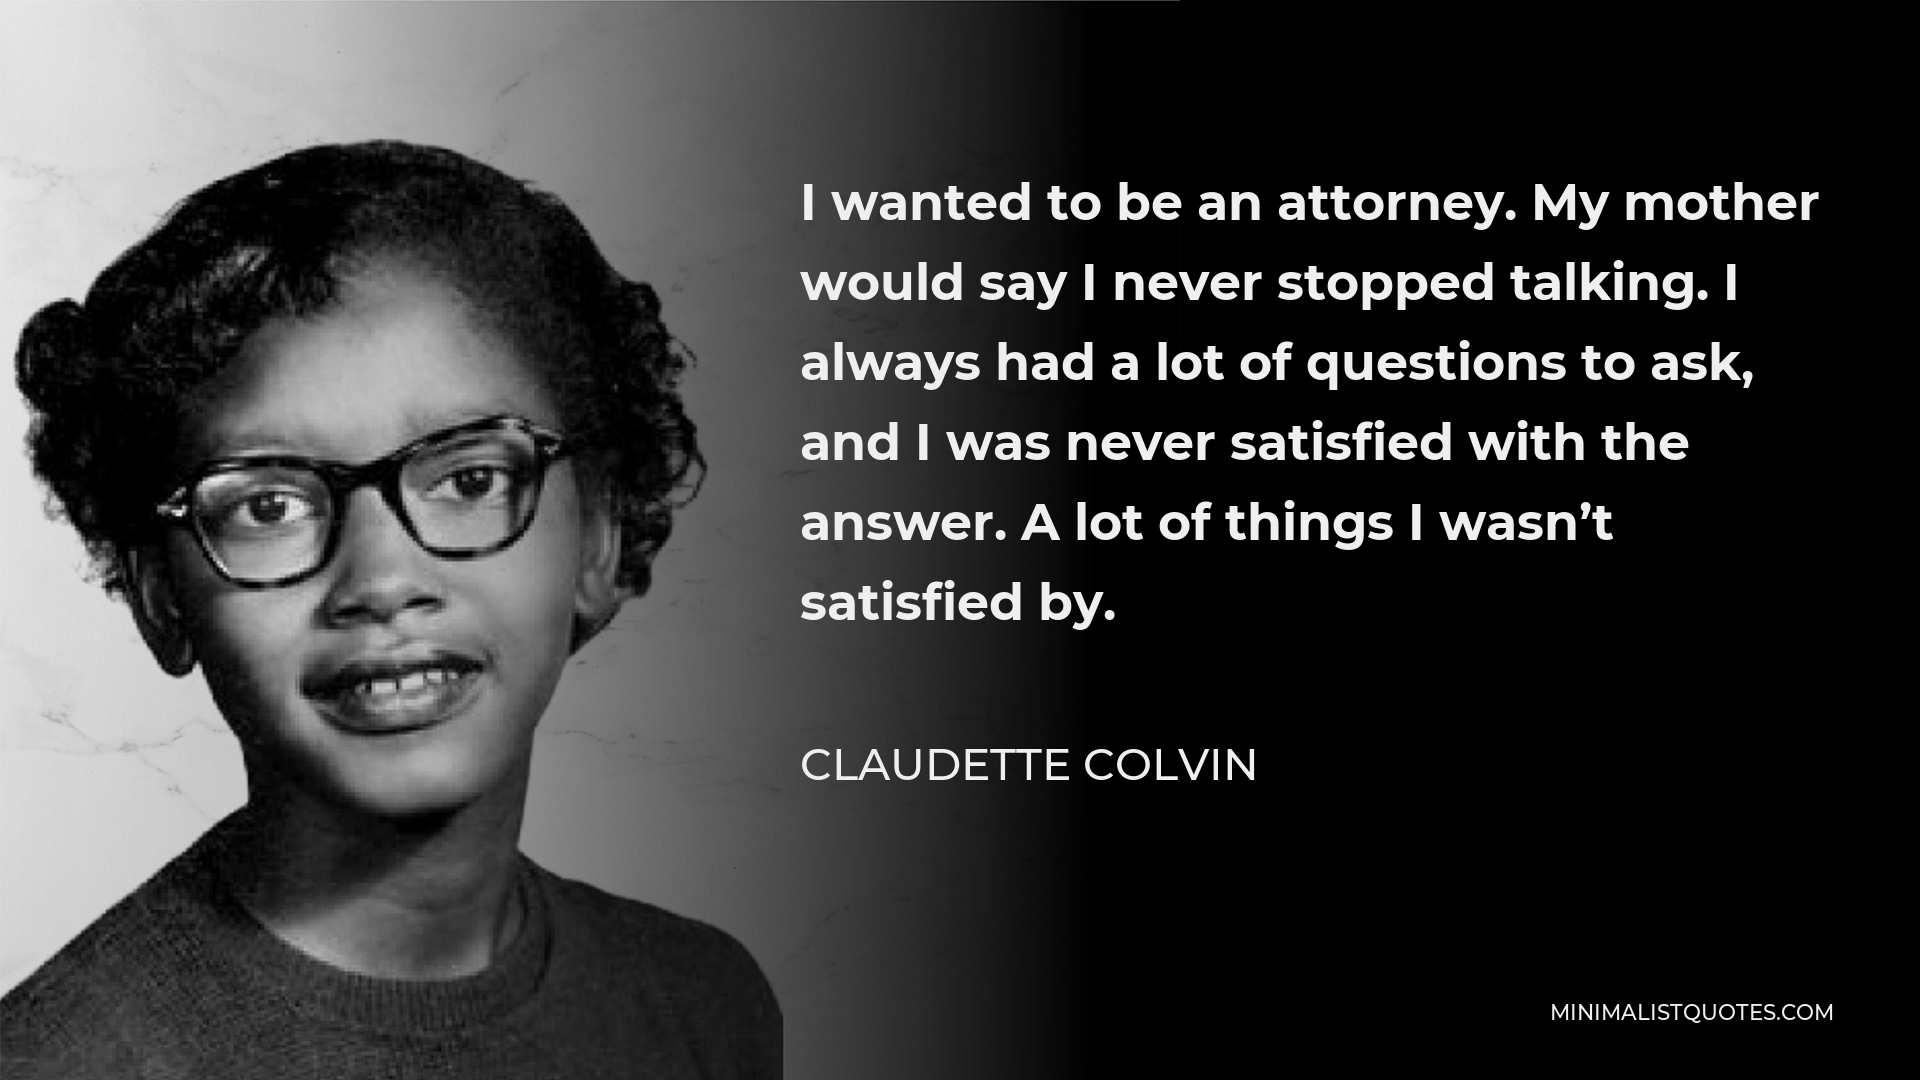 Claudette Colvin Quote - I wanted to be an attorney. My mother would say I never stopped talking. I always had a lot of questions to ask, and I was never satisfied with the answer. A lot of things I wasn’t satisfied by.